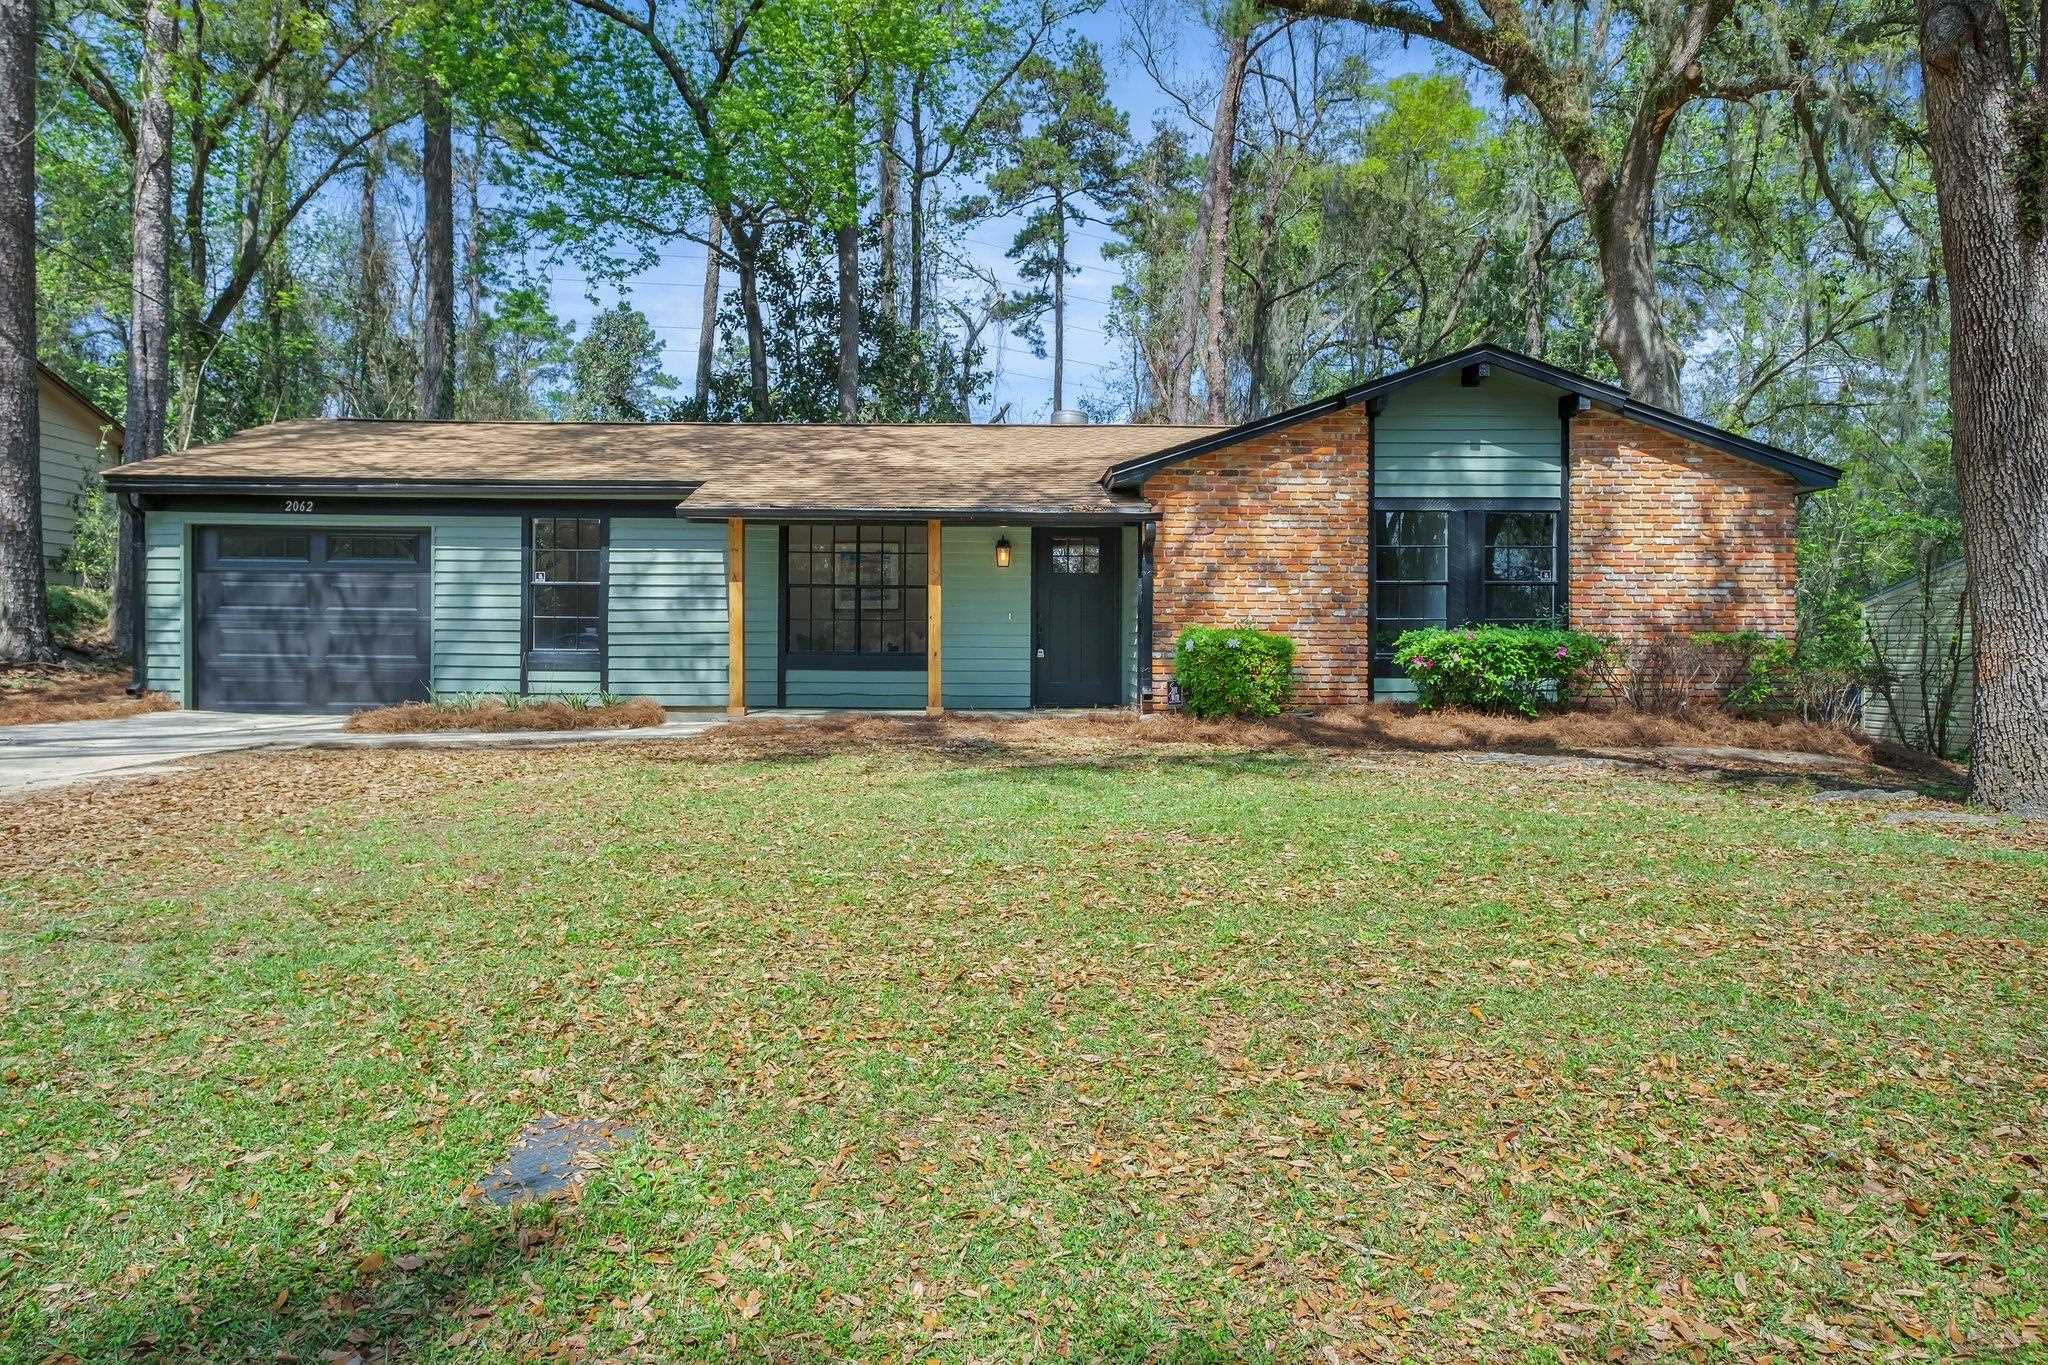 2062 Darnell Circle,TALLAHASSEE,Florida 32303,3 Bedrooms Bedrooms,2 BathroomsBathrooms,Detached single family,2062 Darnell Circle,369693